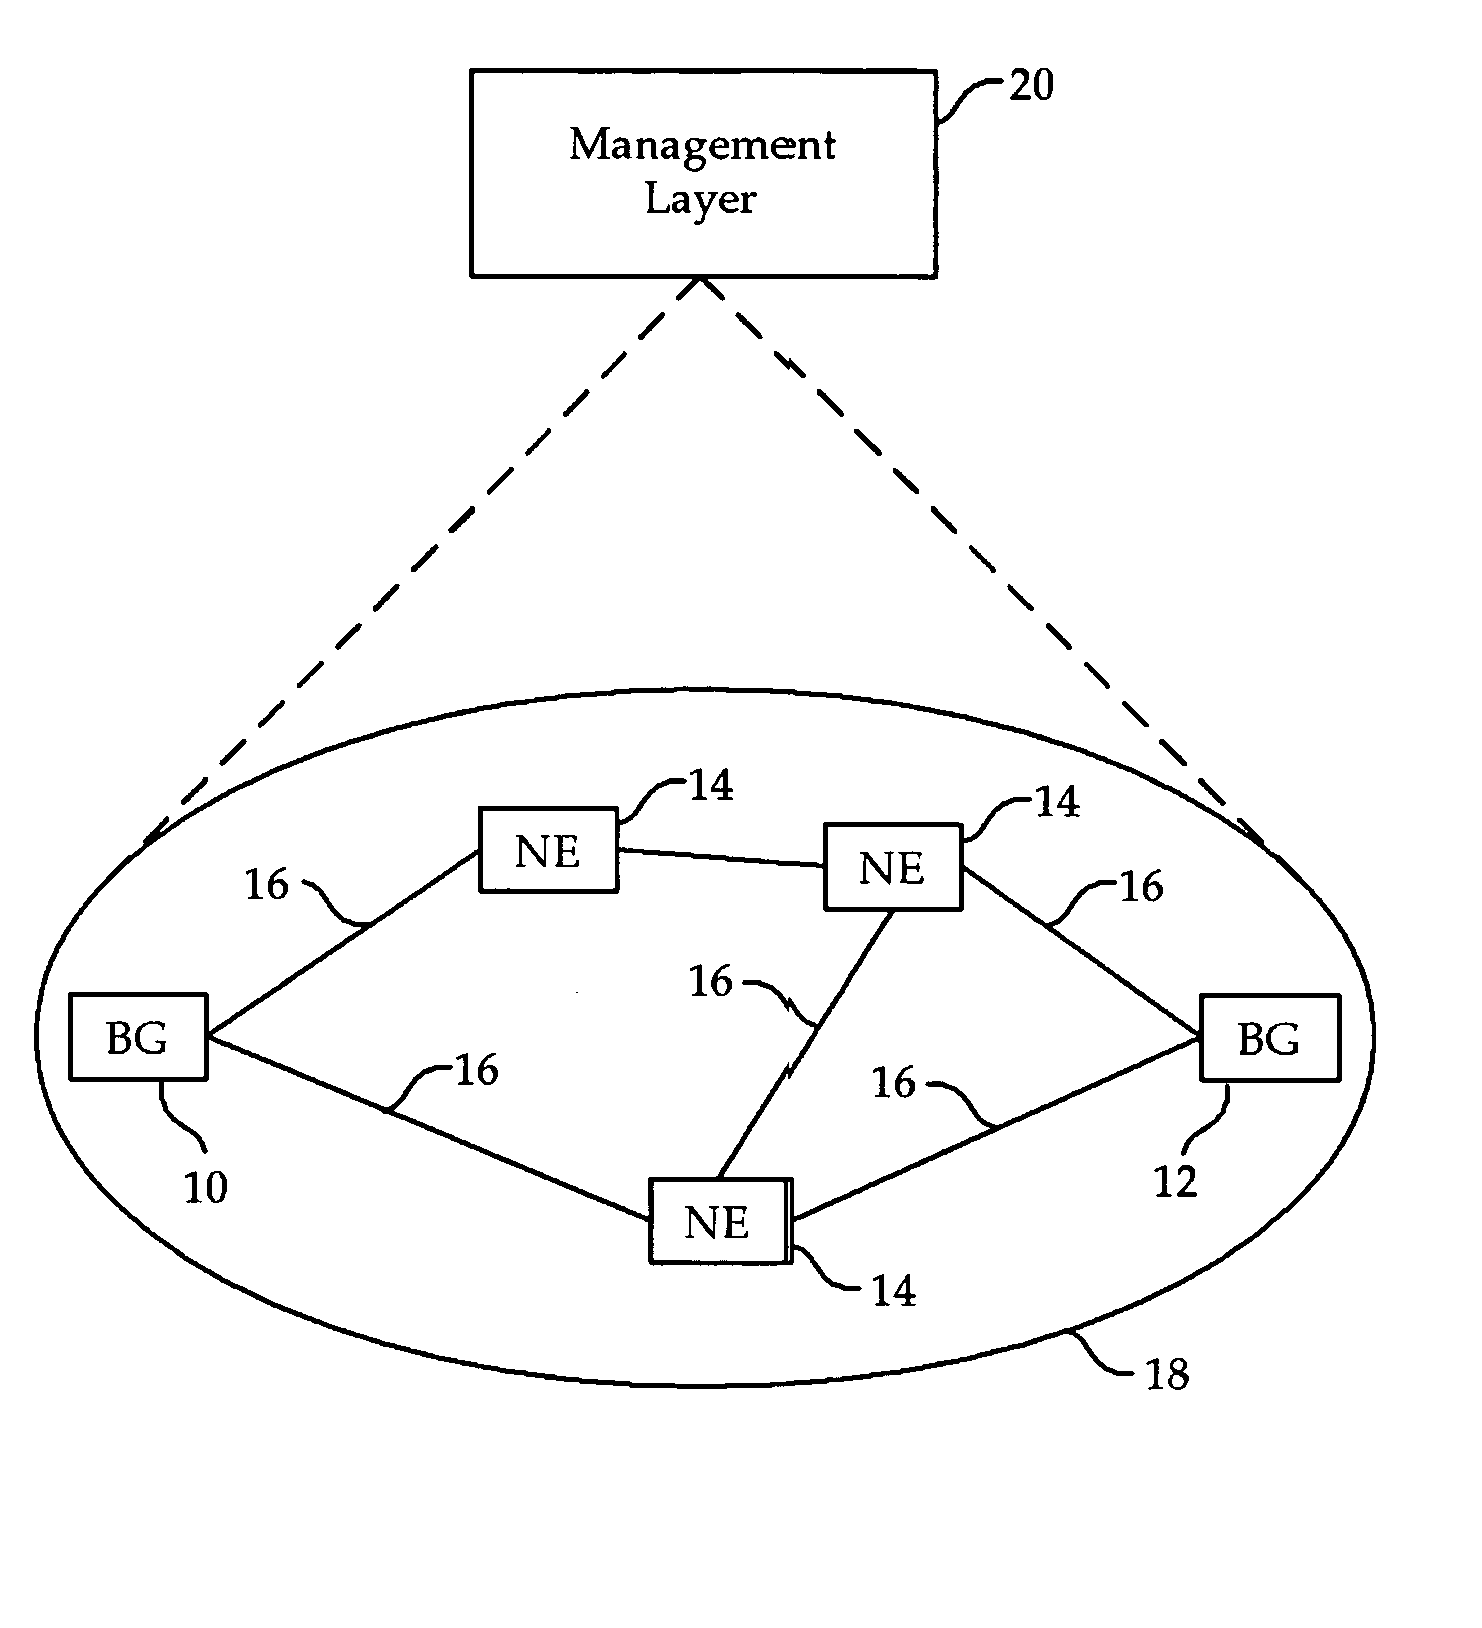 Architecture for configuration and management of cross-domain network services